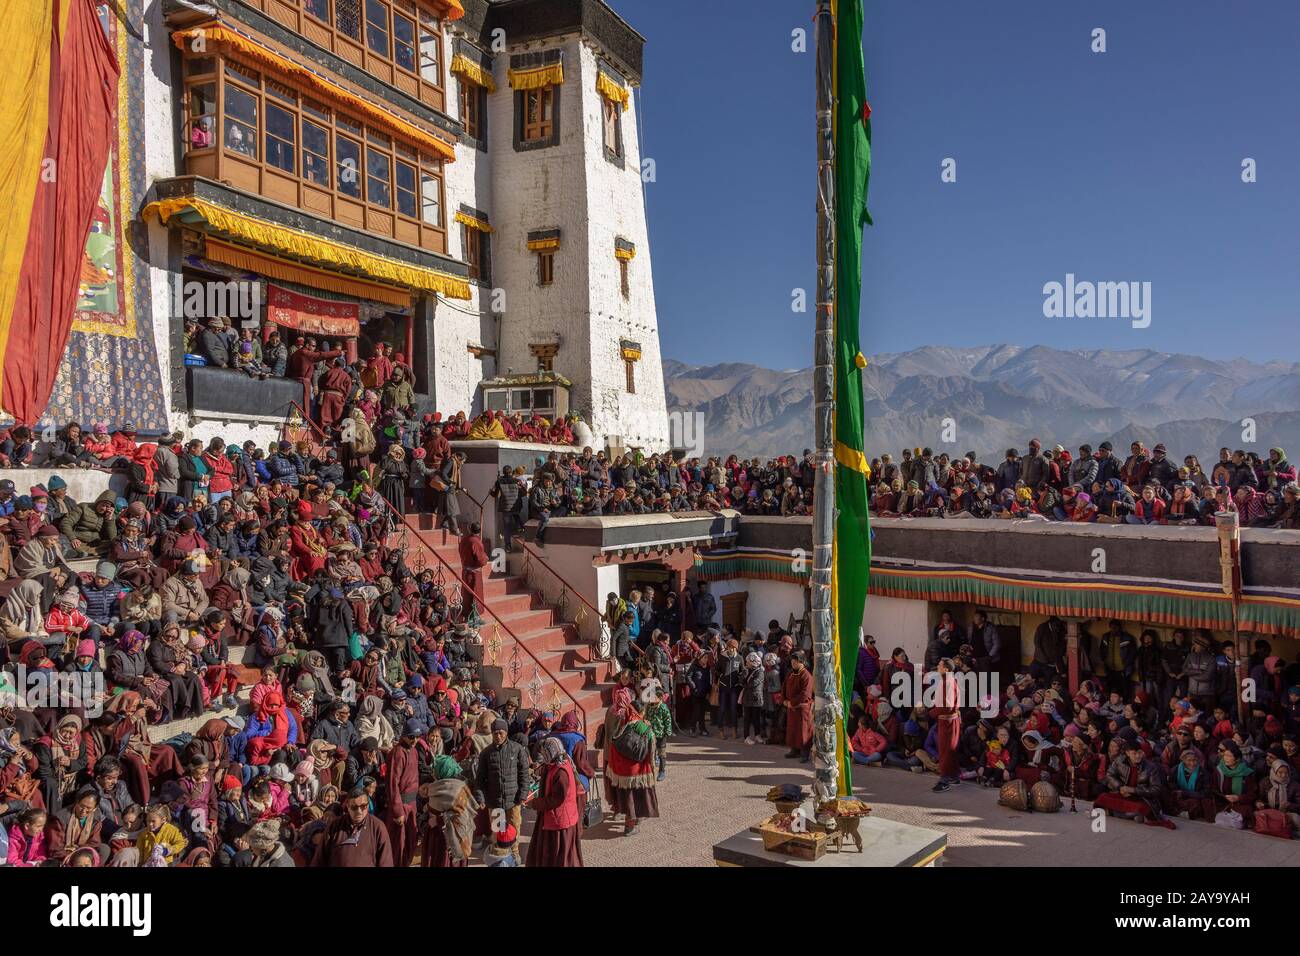 Crowds gather around the courtyard for the Gustor festival, Spituk Gompa, Leh, Ladakh Stock Photo